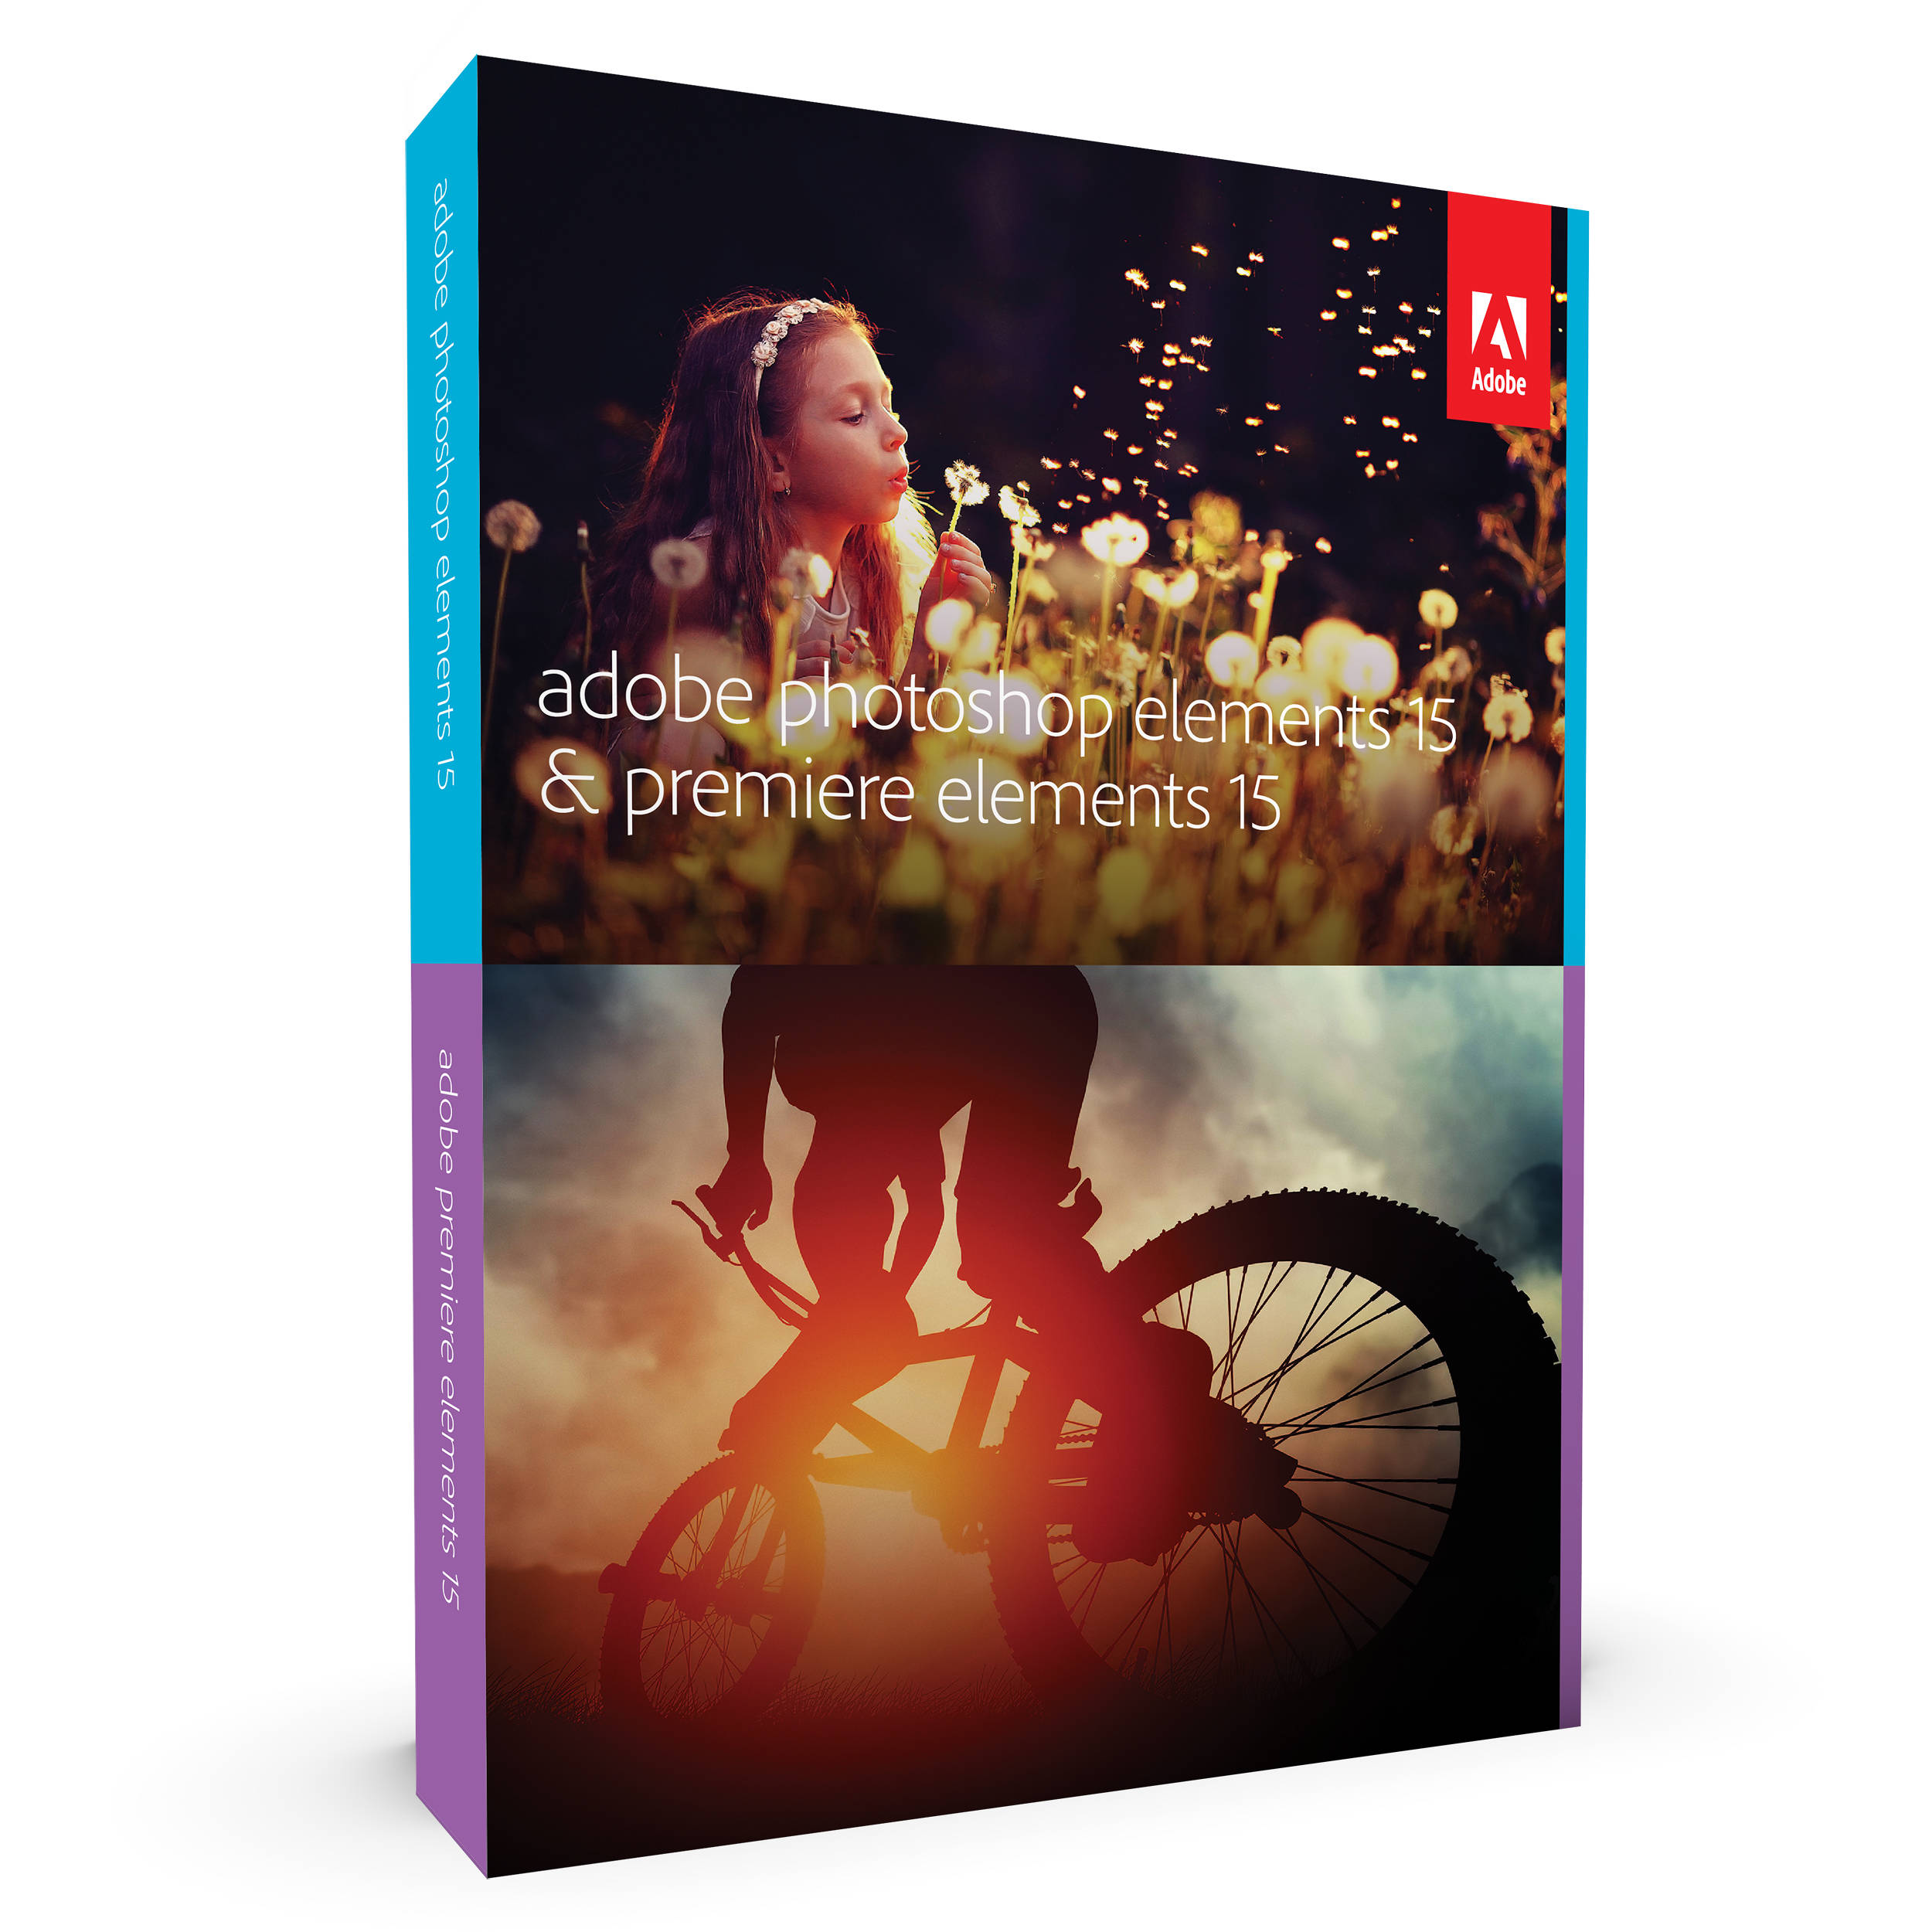 adobe photoshop elements 15 release date